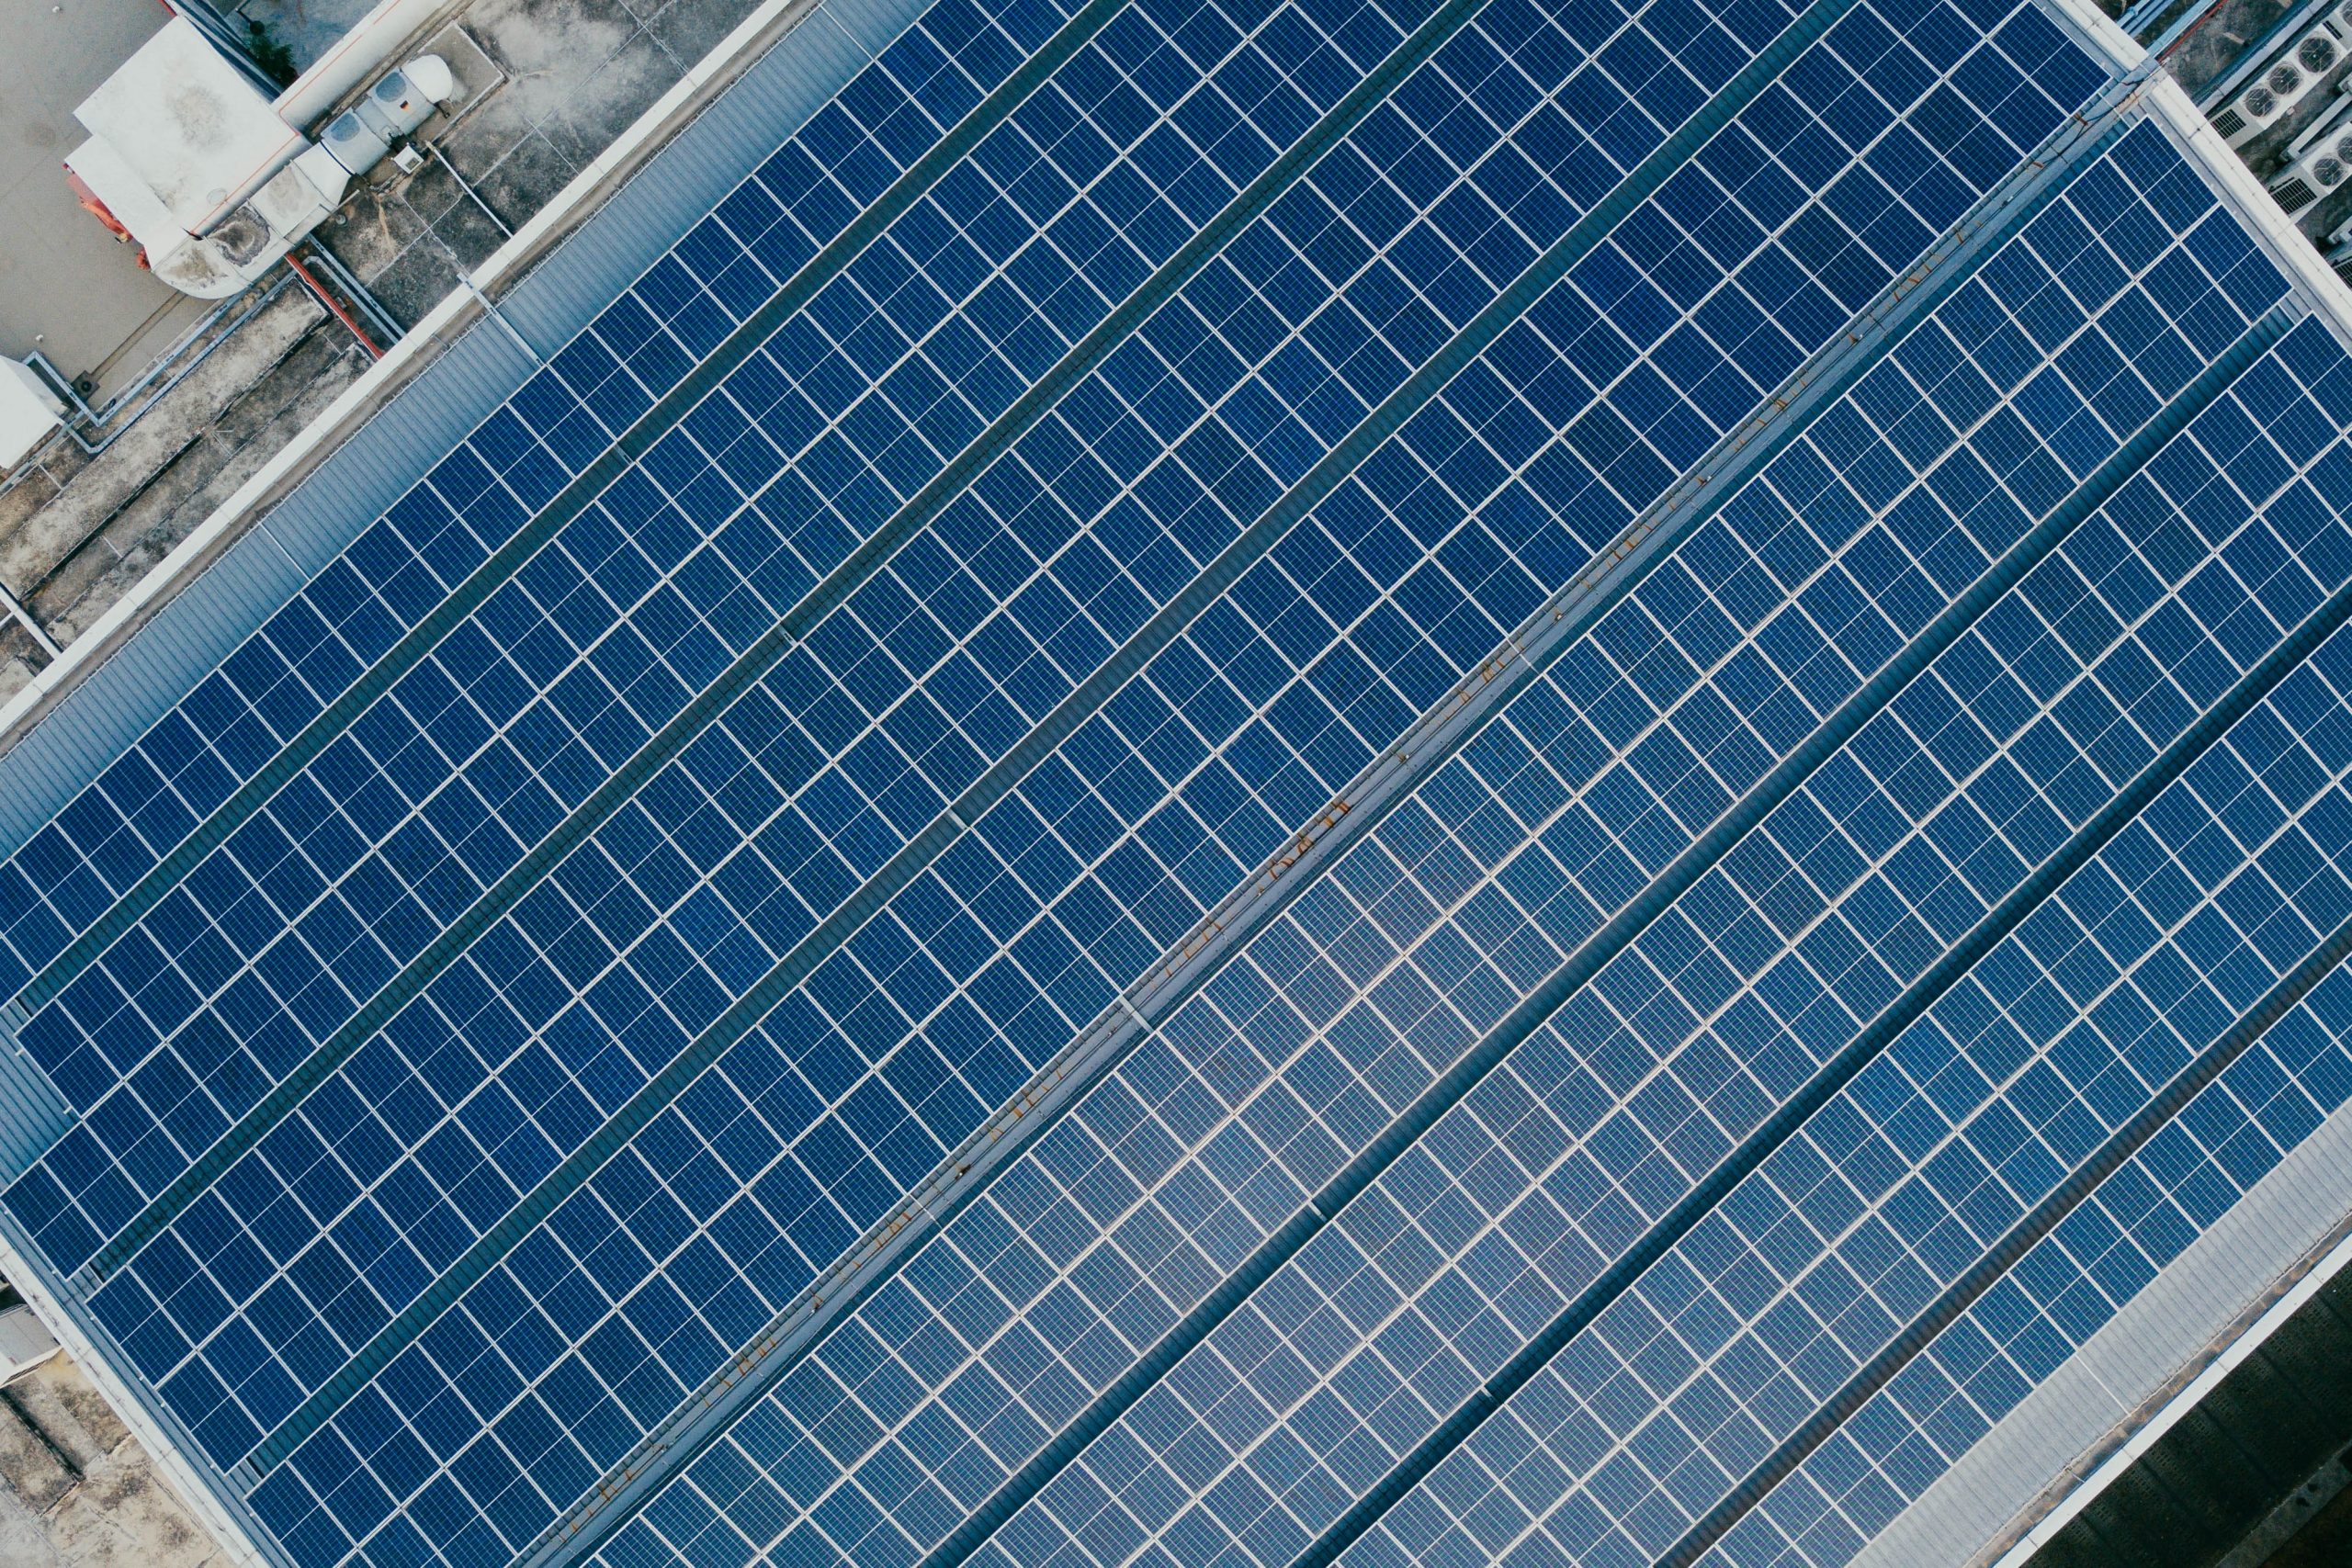 Bird's eye view of solar panels on a rooftop